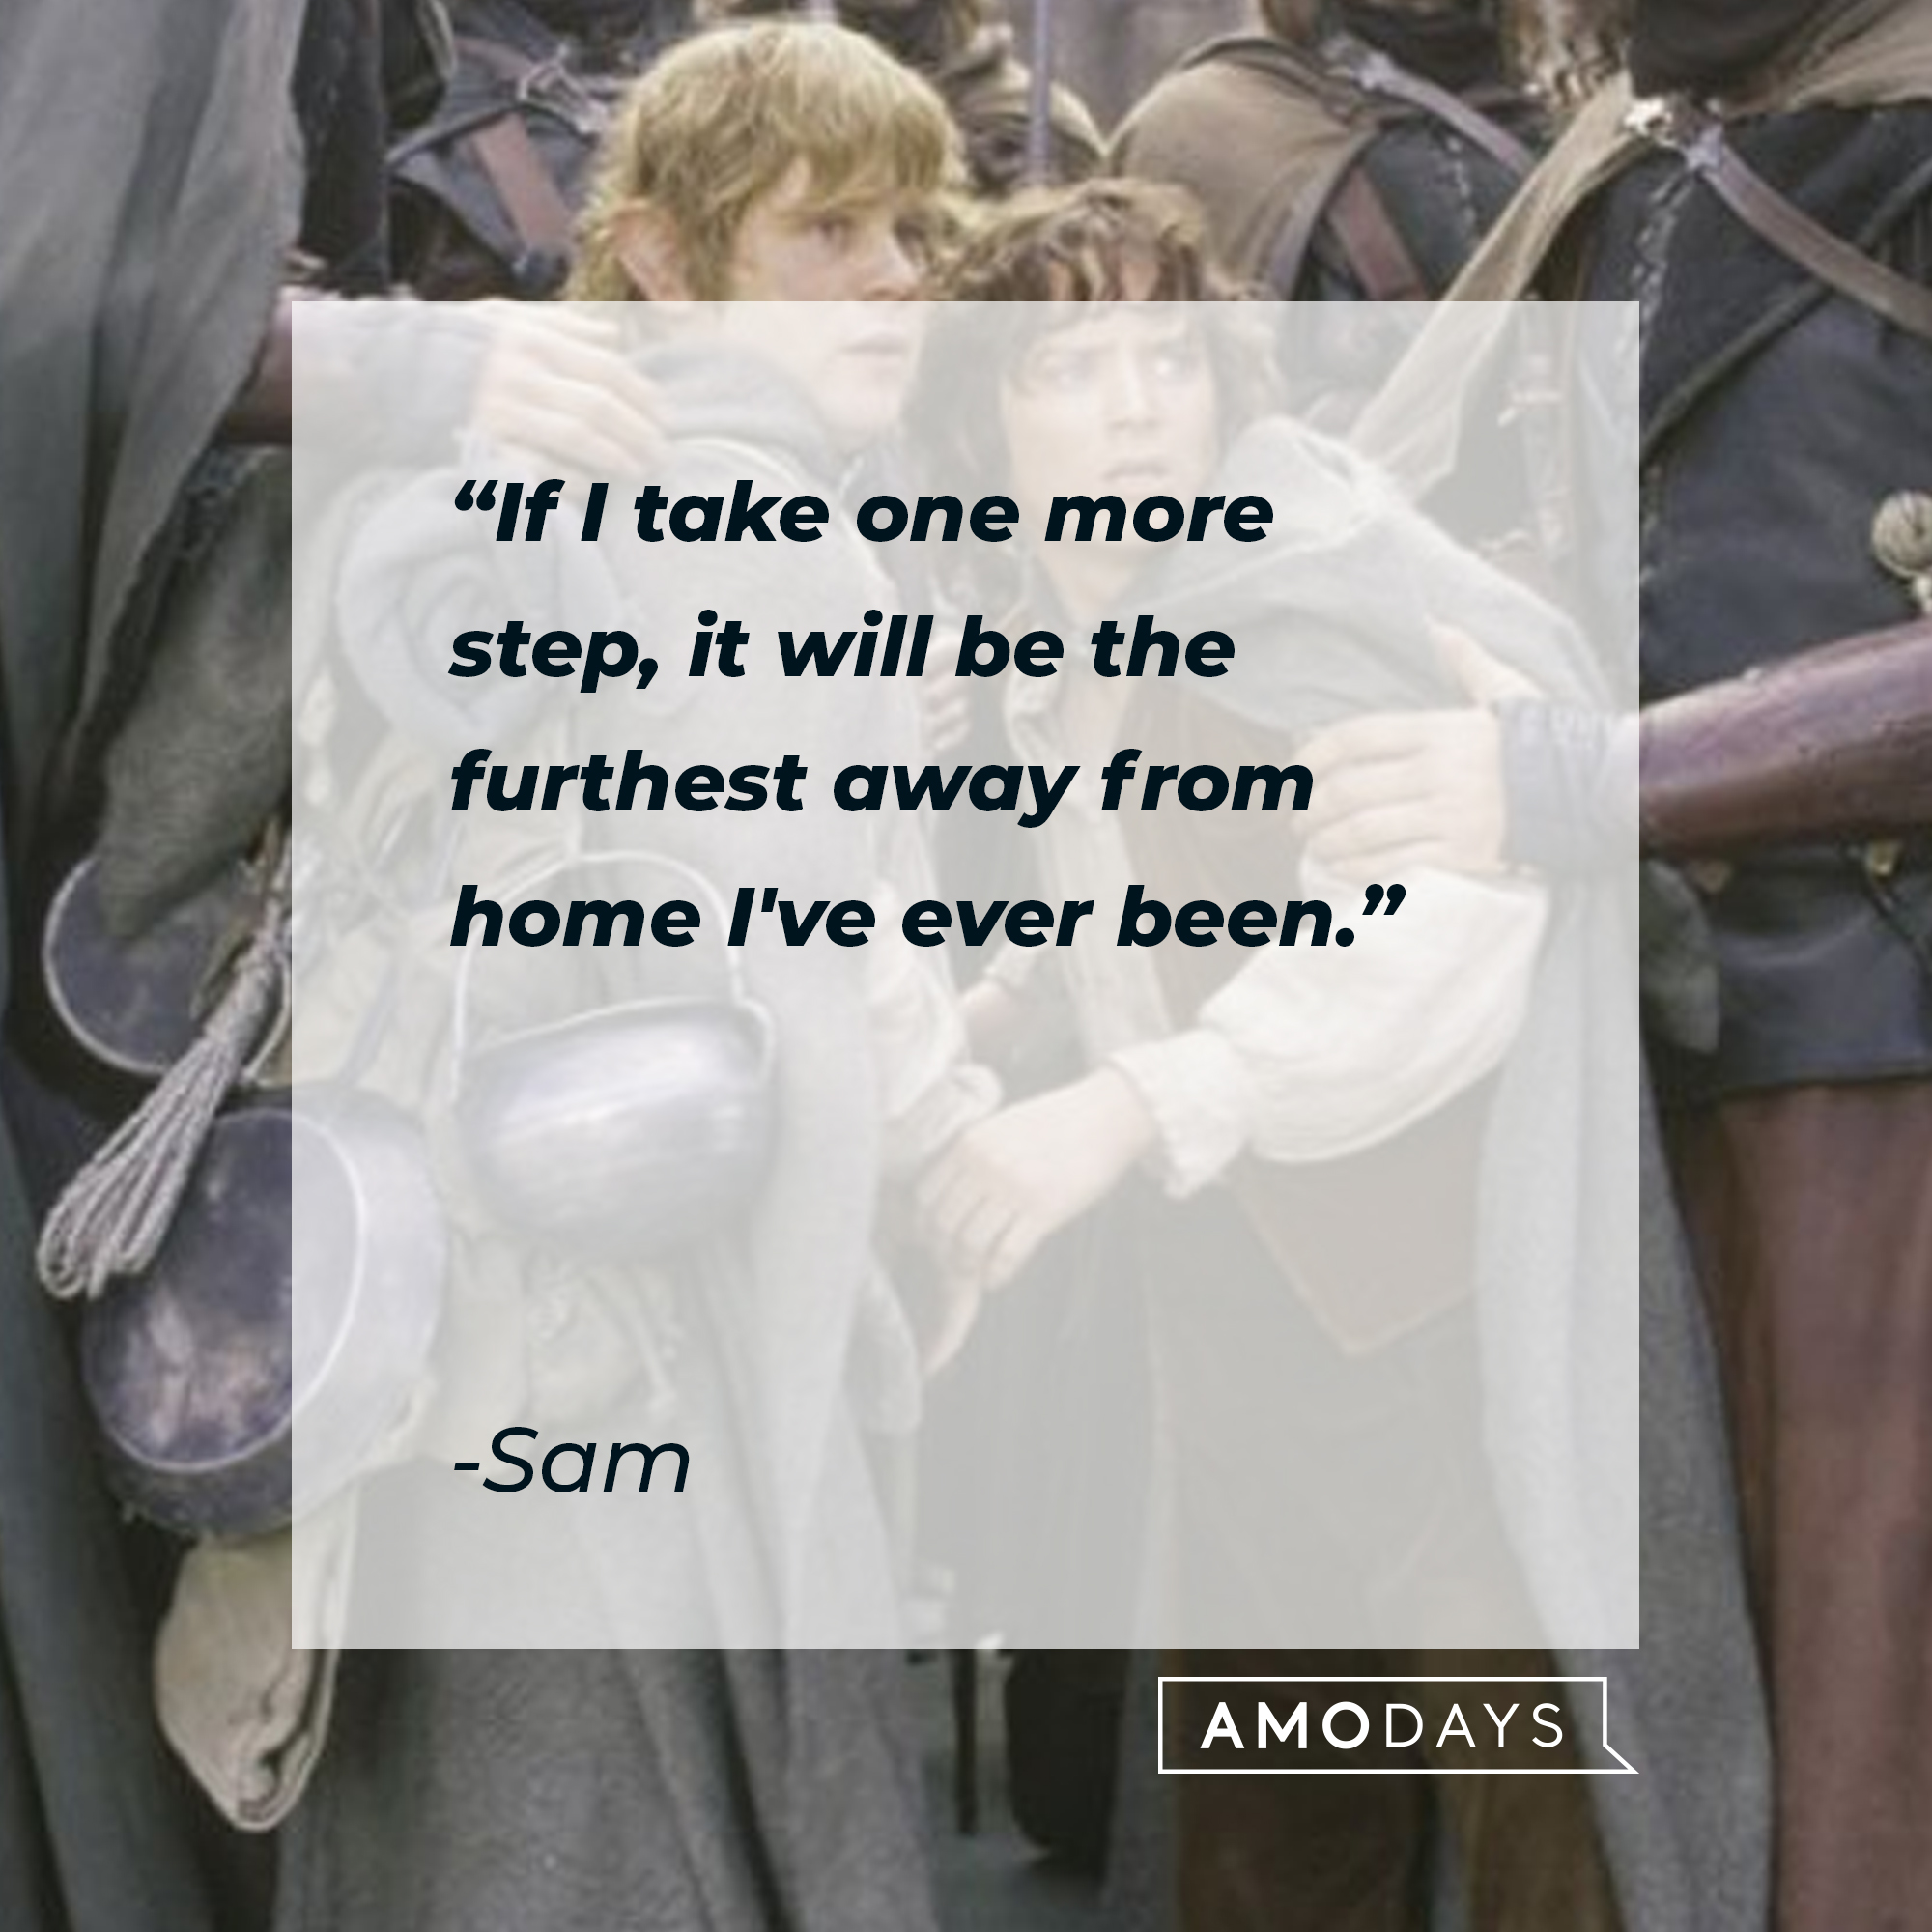 Sam's quote: "If I take one more step, it will be the furthest away from home I've ever been." | Source: facebook.com/lordoftheringstrilogy